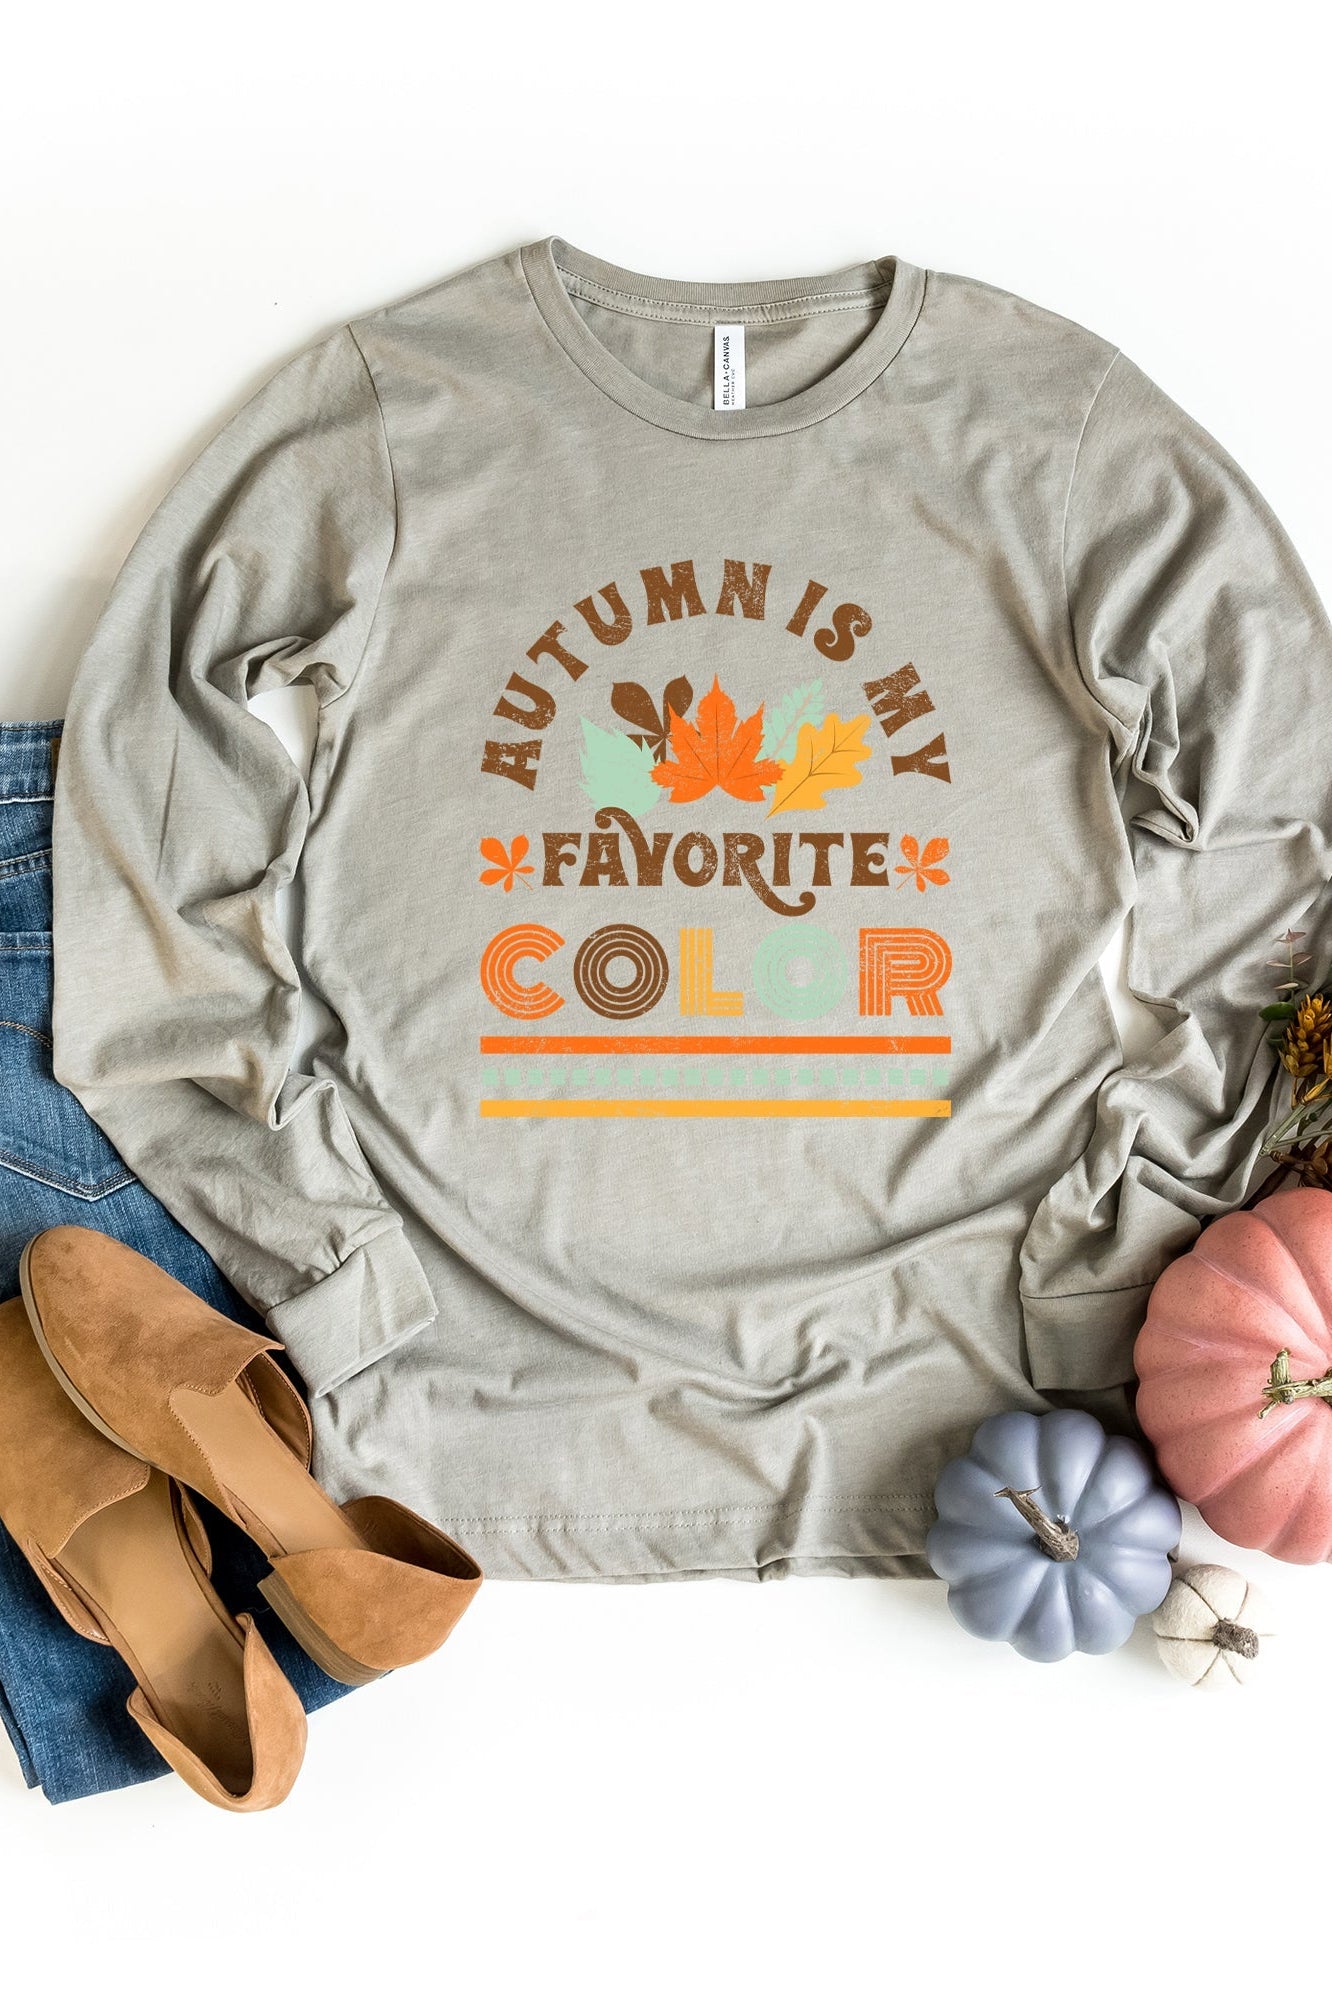 Autumn Is My Favorite Color Colorful | Long Sleeve Crew Neck Olive and Ivory Retail